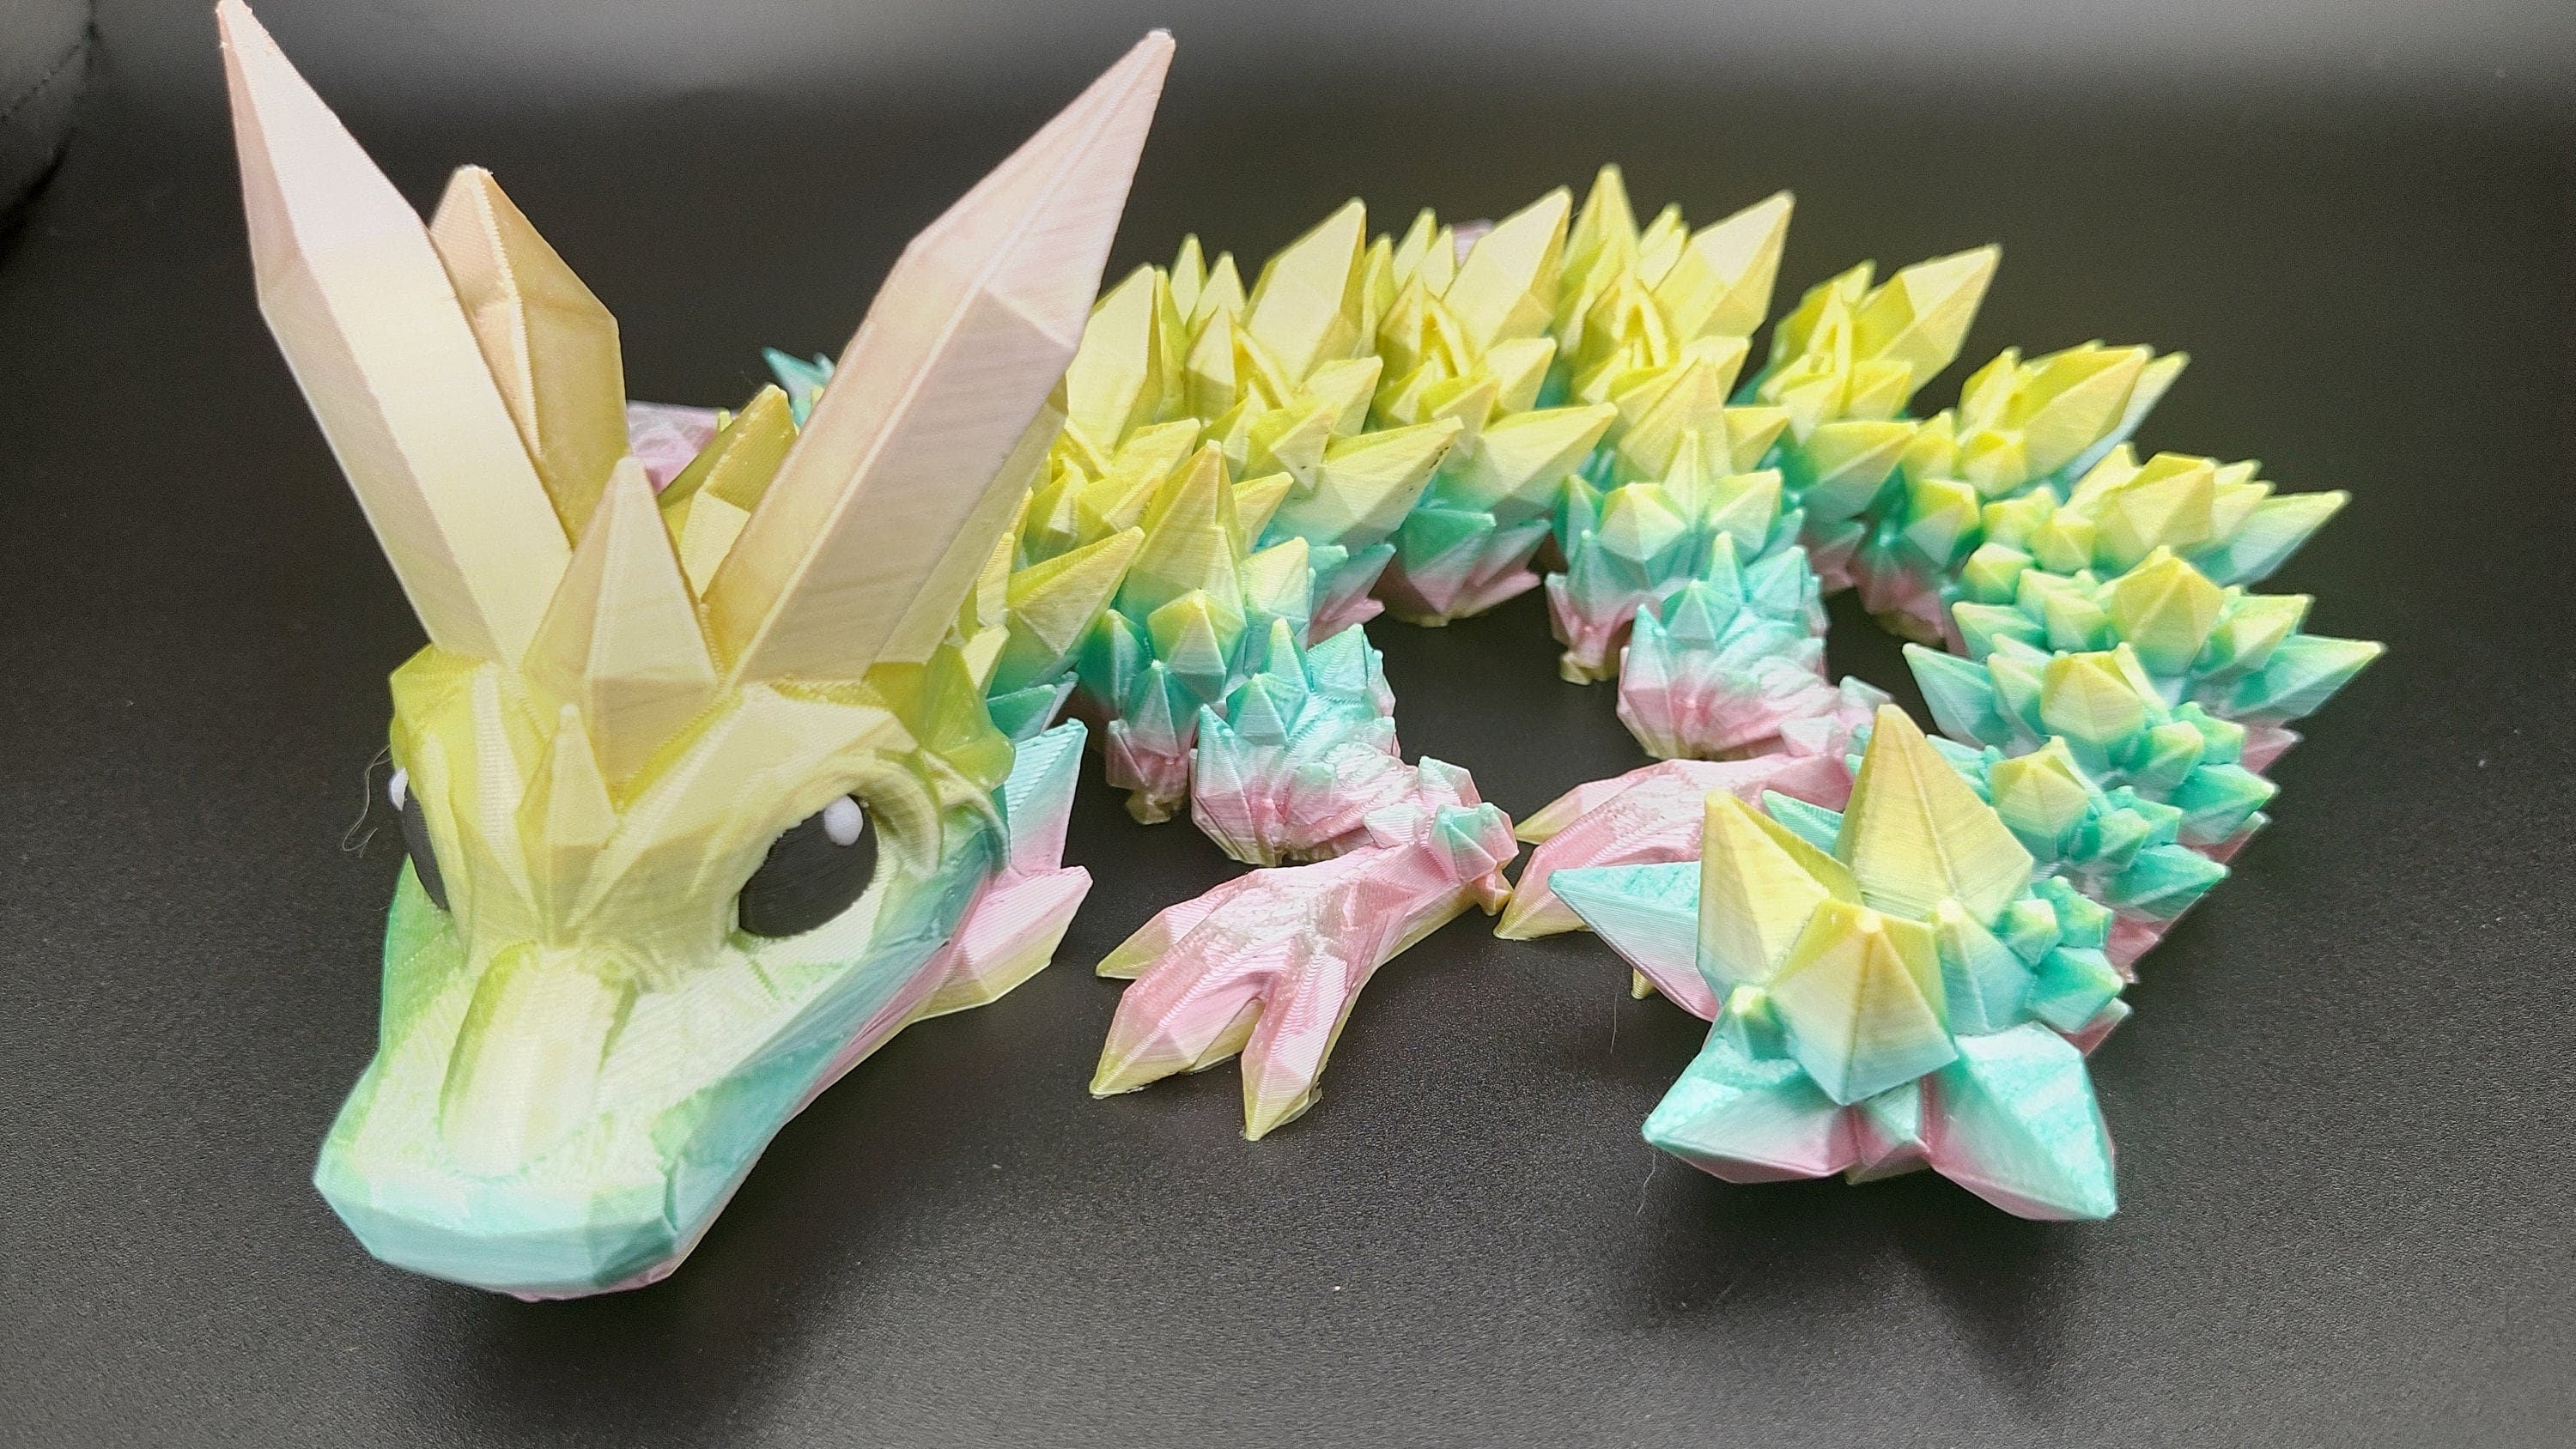 Crystal Baby Dragon | 3D Printed Crystal Dragon | 11.5 inches | Dragon friend | Adopt this dragon today (made) | Fidget Toy | Flexi Dragon.